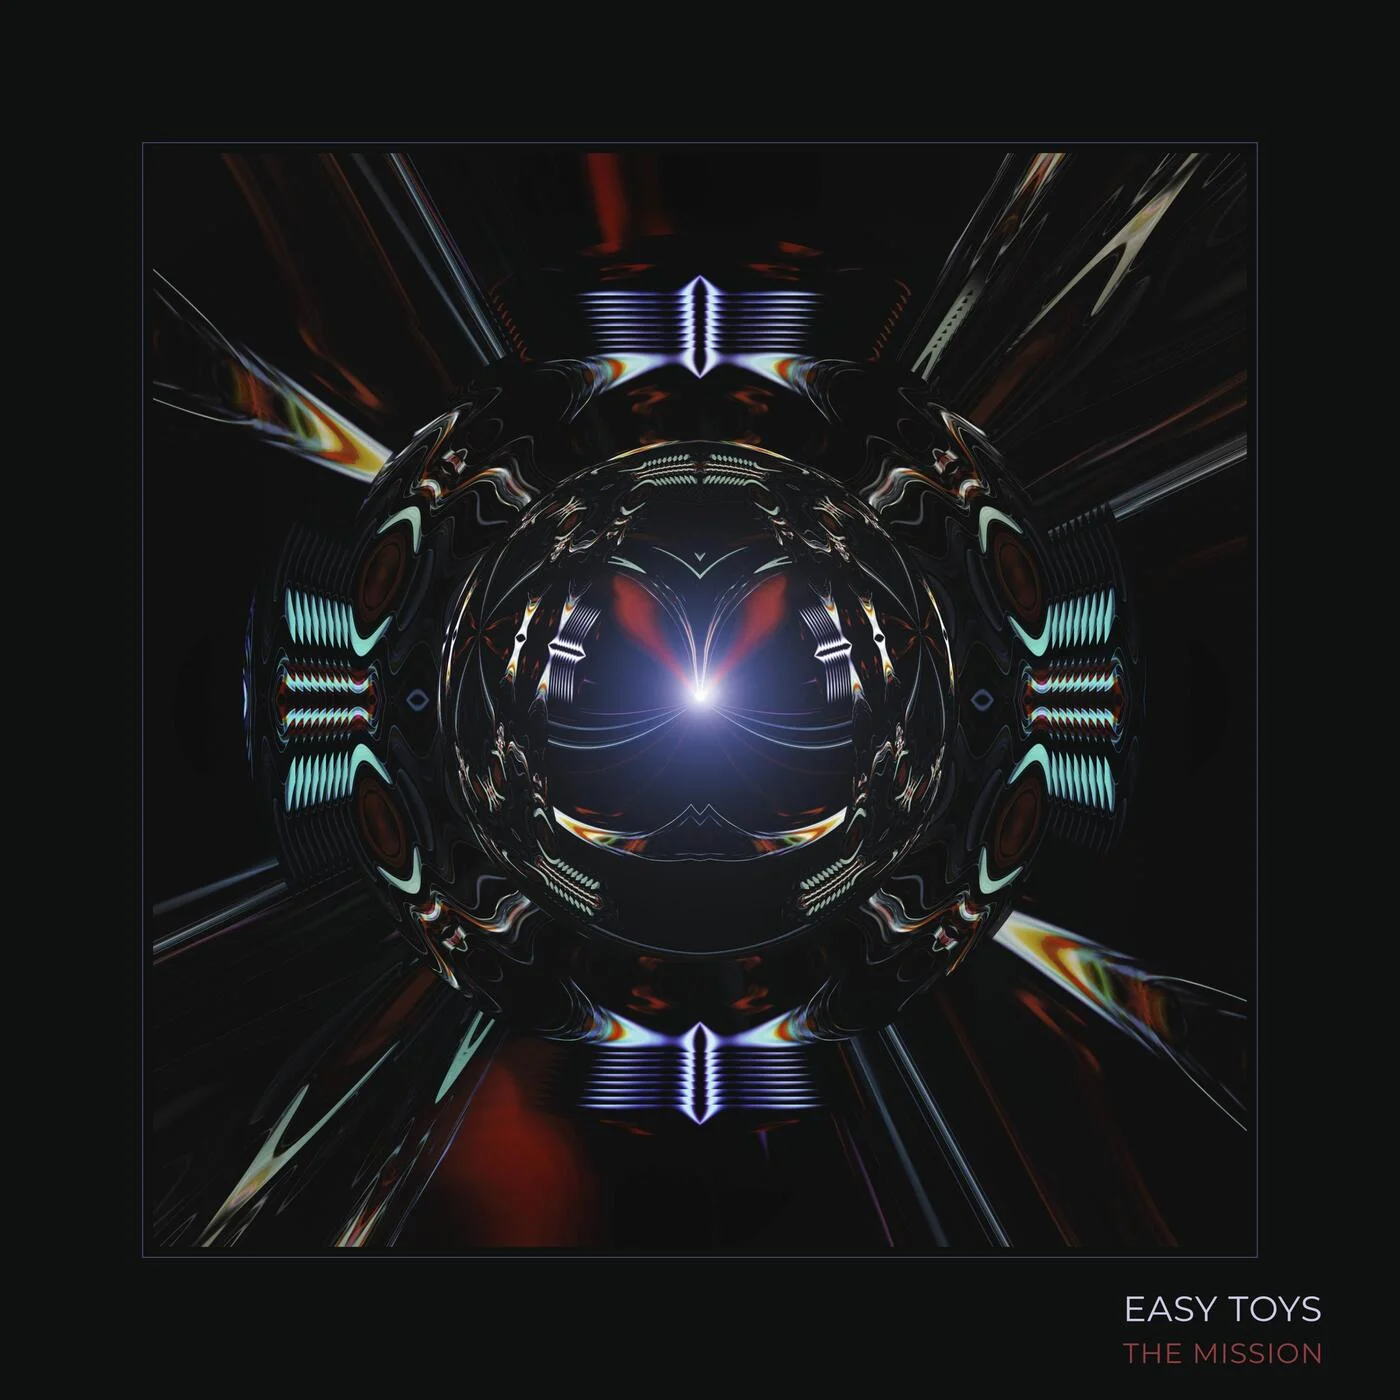 “The Mission” is the brand new Techno single by “Easy Toys”